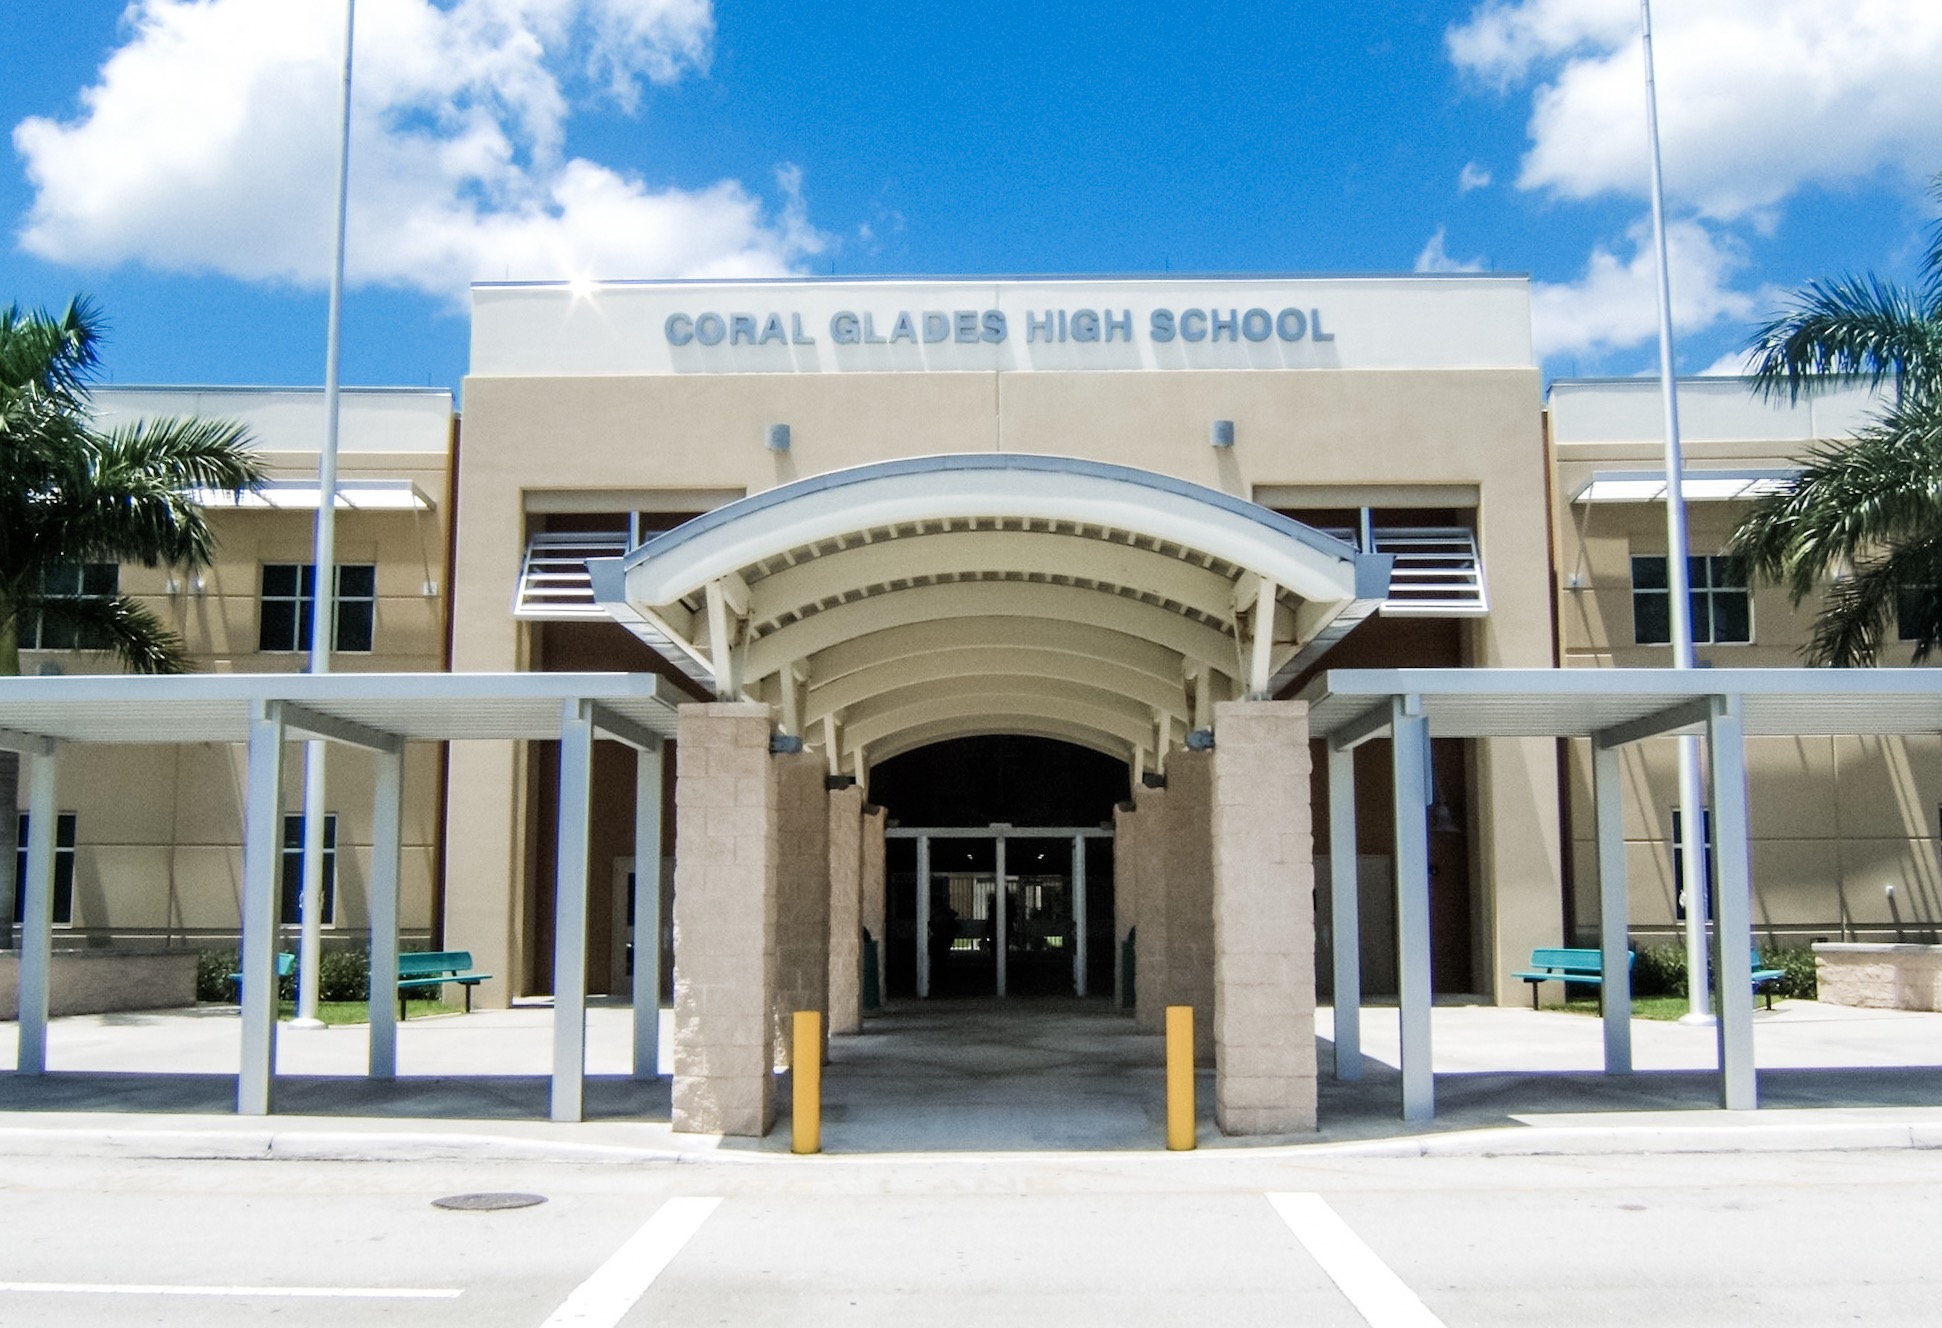 Registration Open for Freshman and New Student 'Bootcamp' at Coral Glades High School